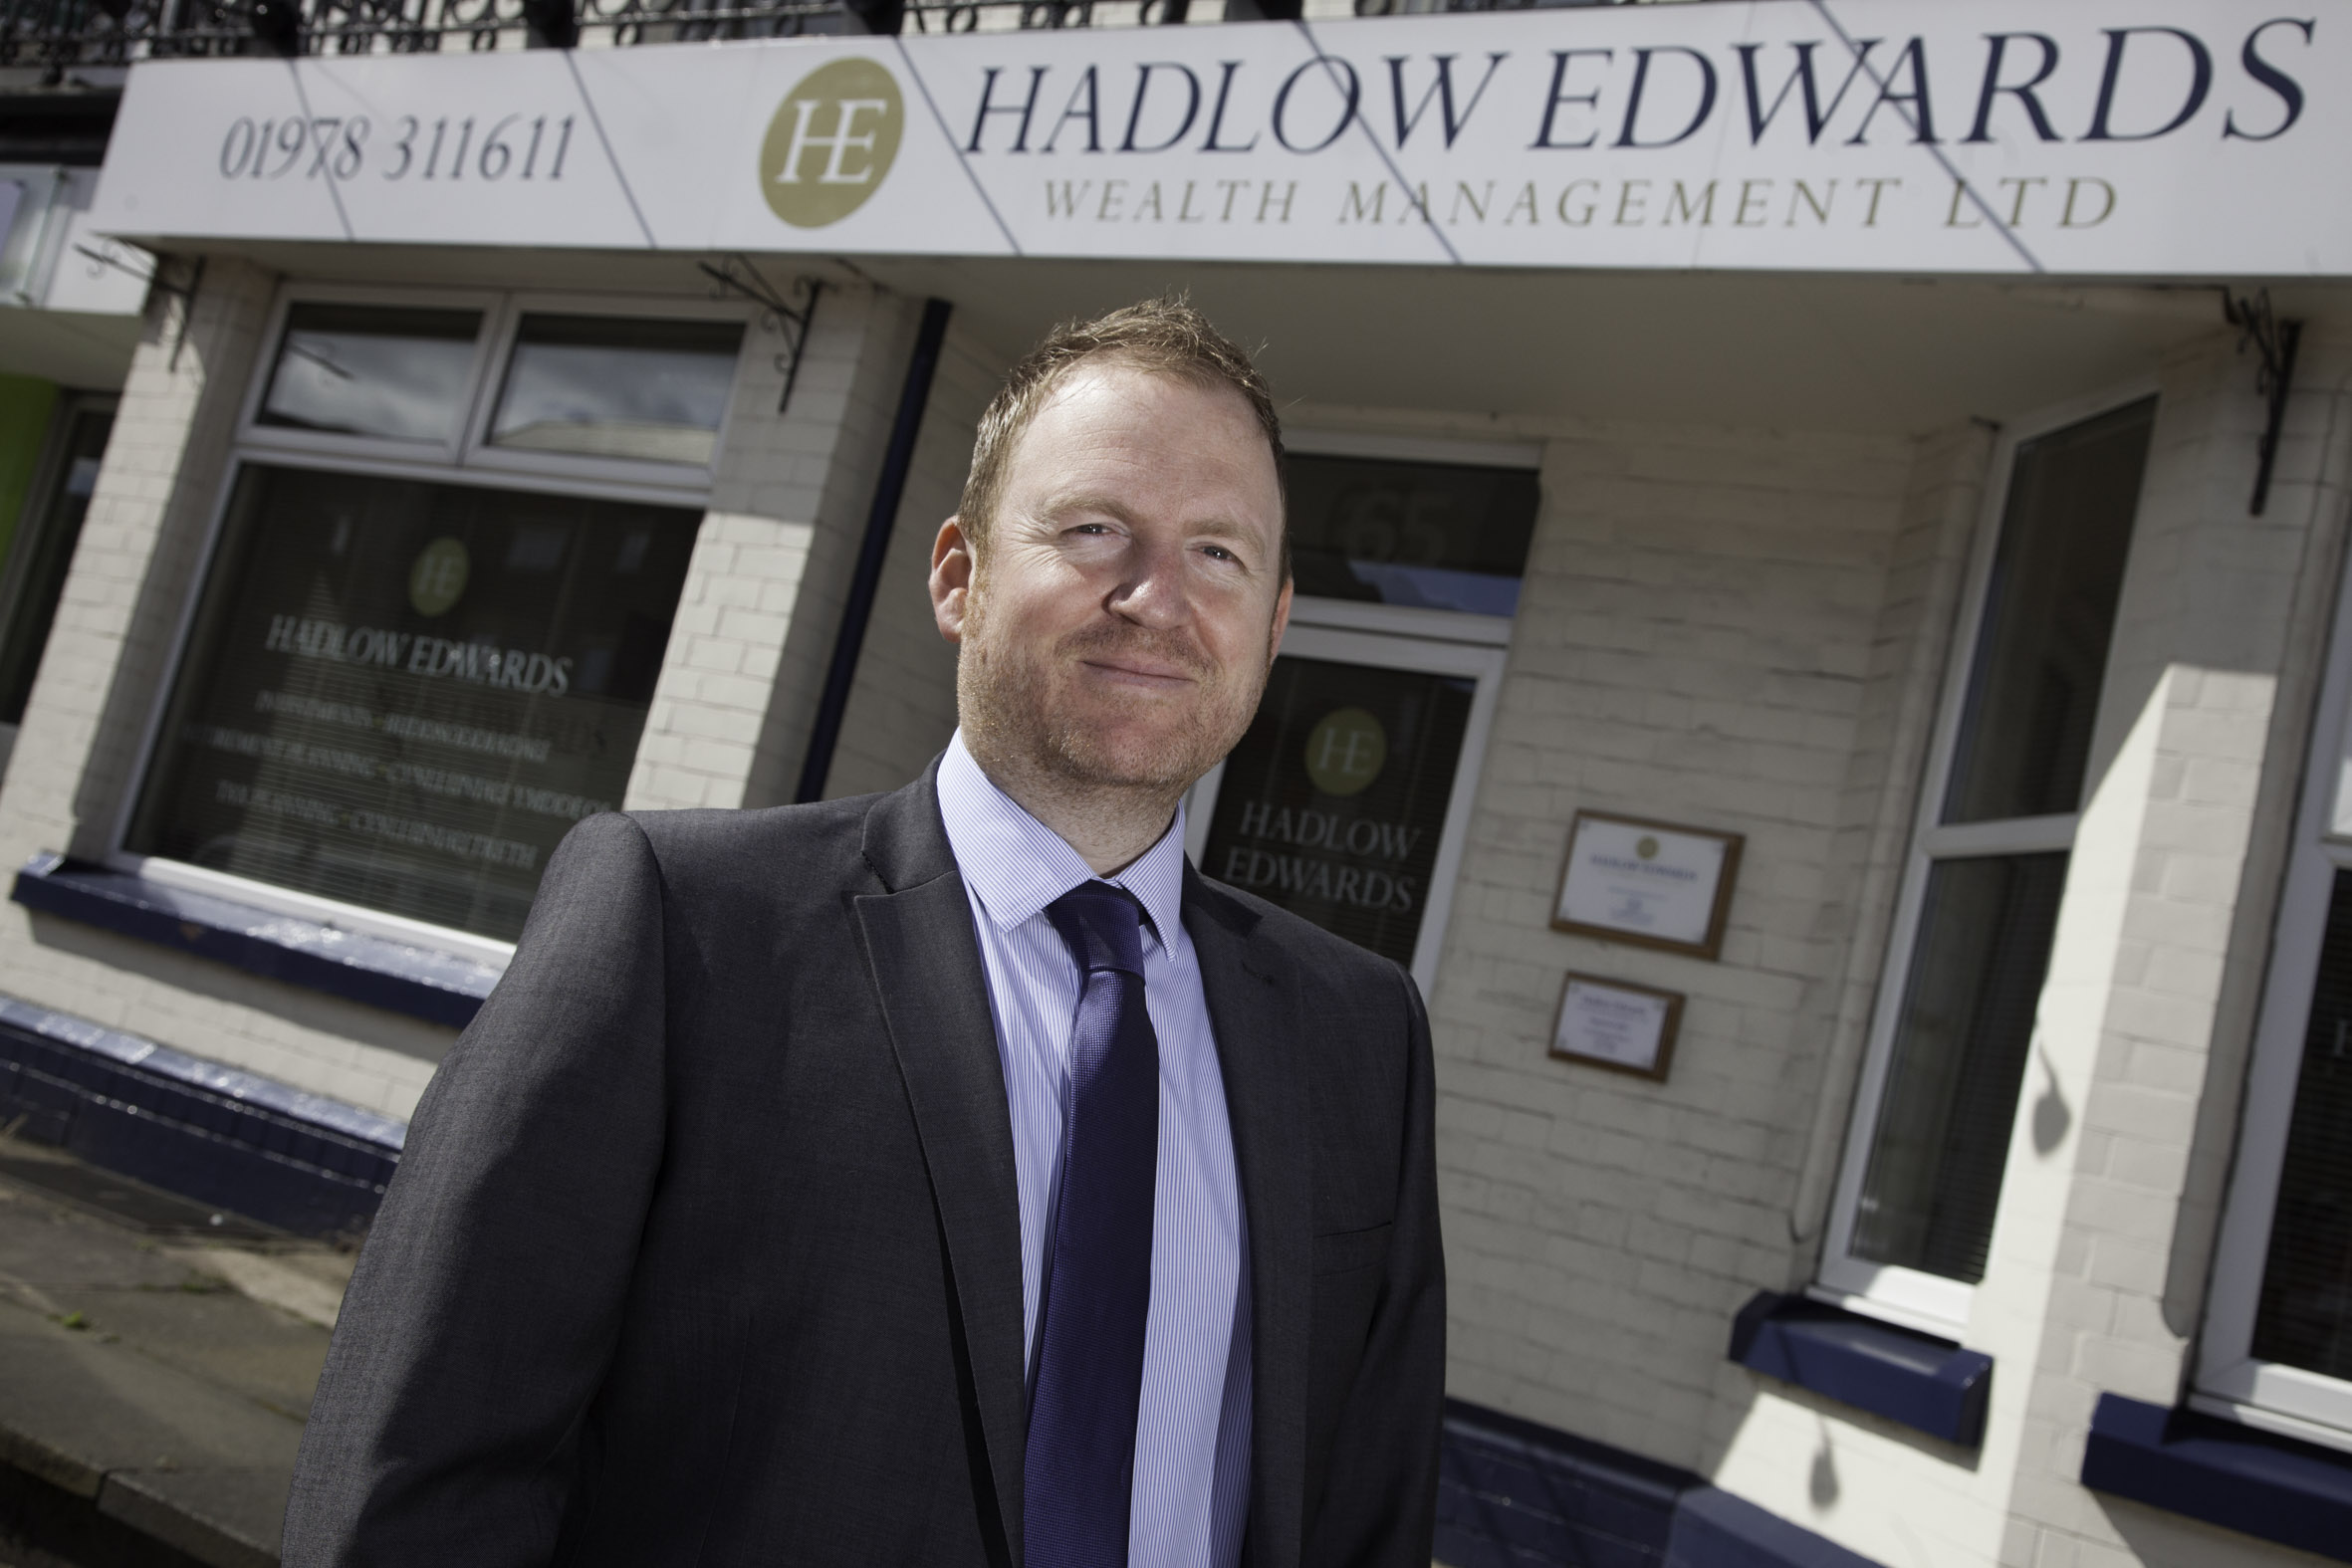 Hadlow Edwards Pictured is mortgage advisor Johnathan Peatfield.